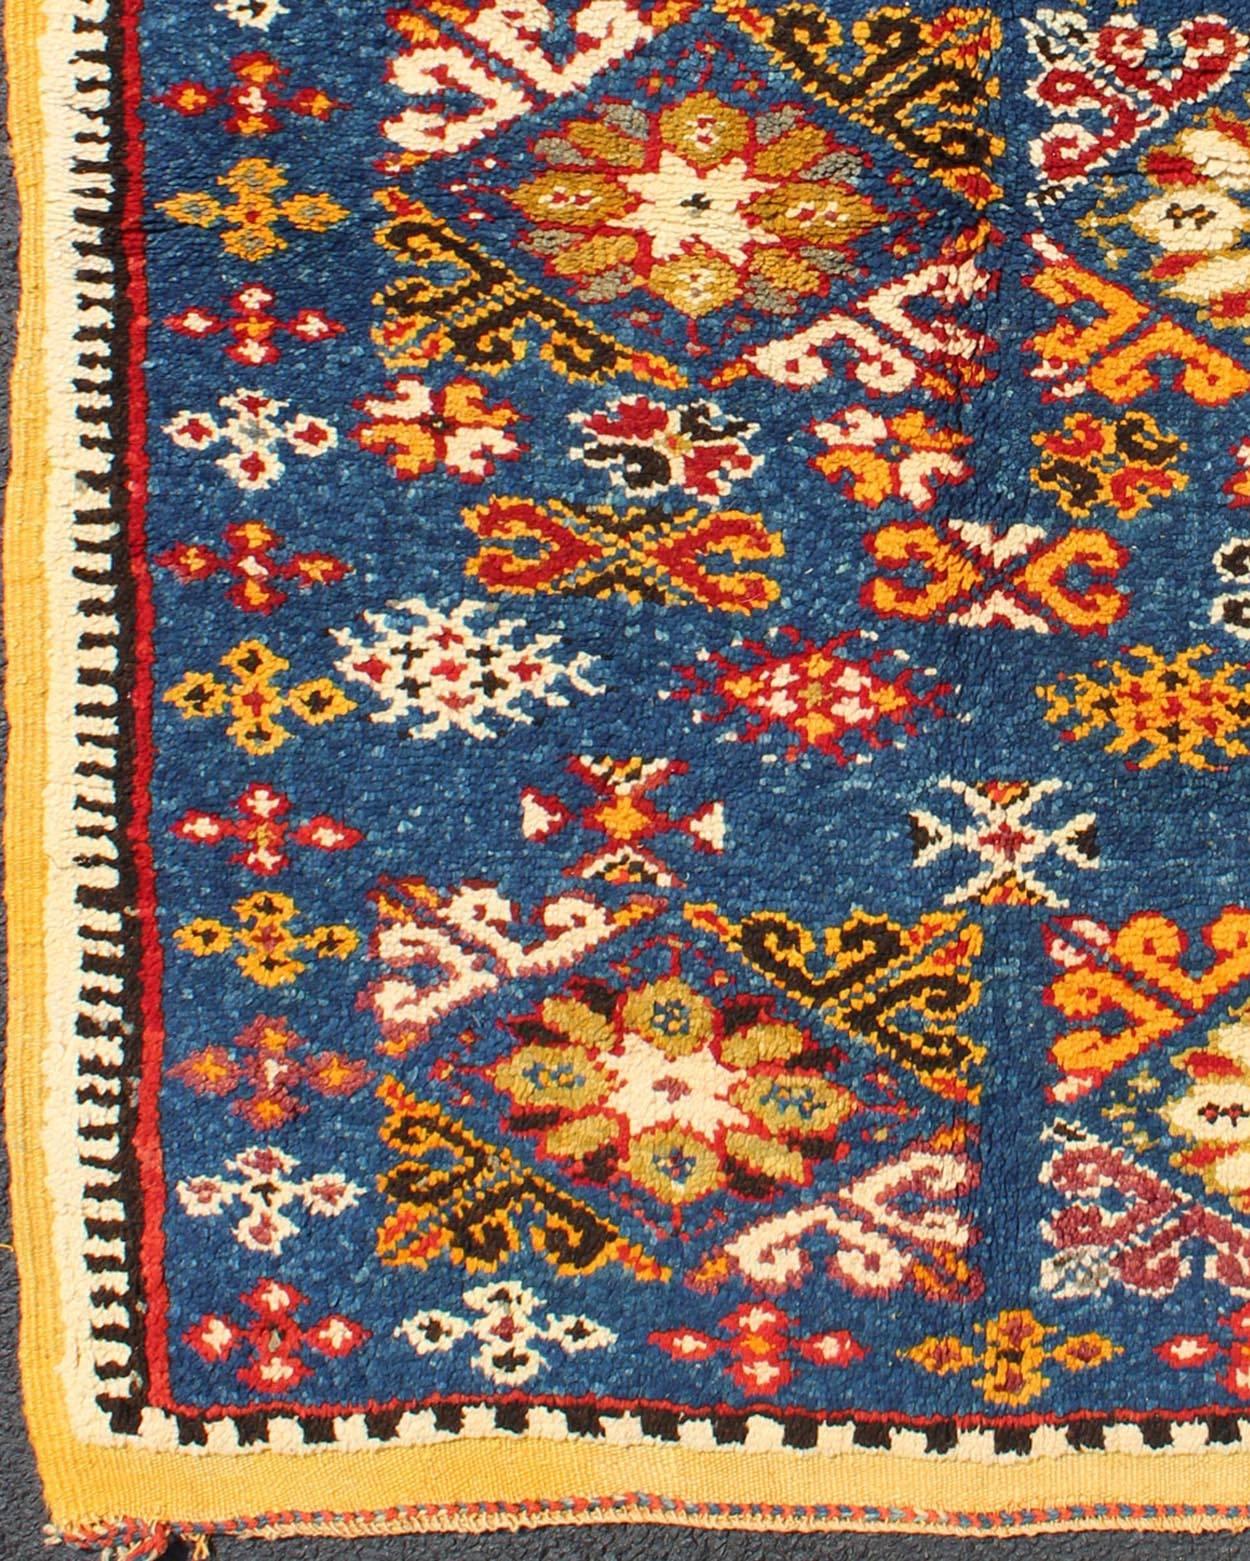 Vintage Moroccan rug with bright blue field and colorful geometric motifs, rug n15-0401, country of origin / type: Morocco / Tribal, circa 1980s

This gorgeous vintage Moroccan carpet from the late 20th century displays a stunning, all-over